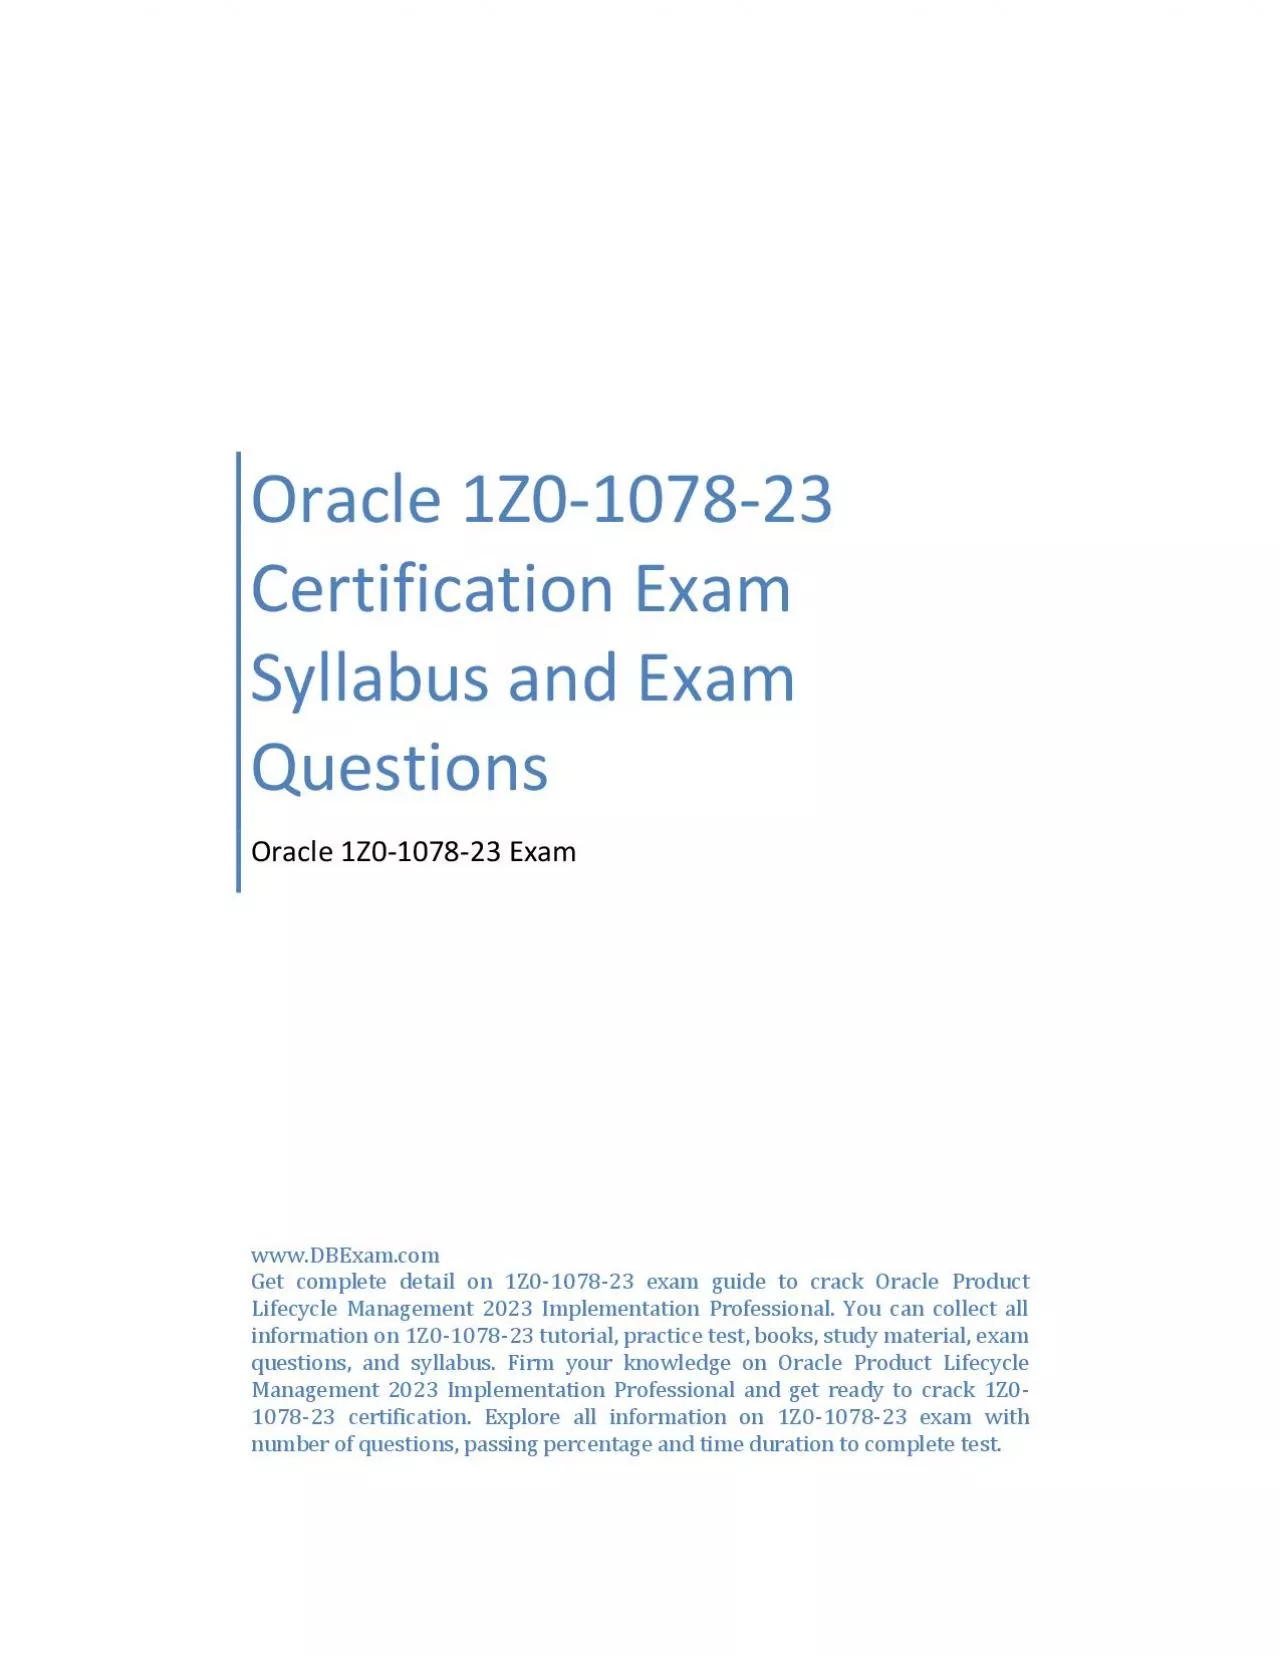 Oracle 1Z0-1078-23 Certification Exam Syllabus and Exam Questions